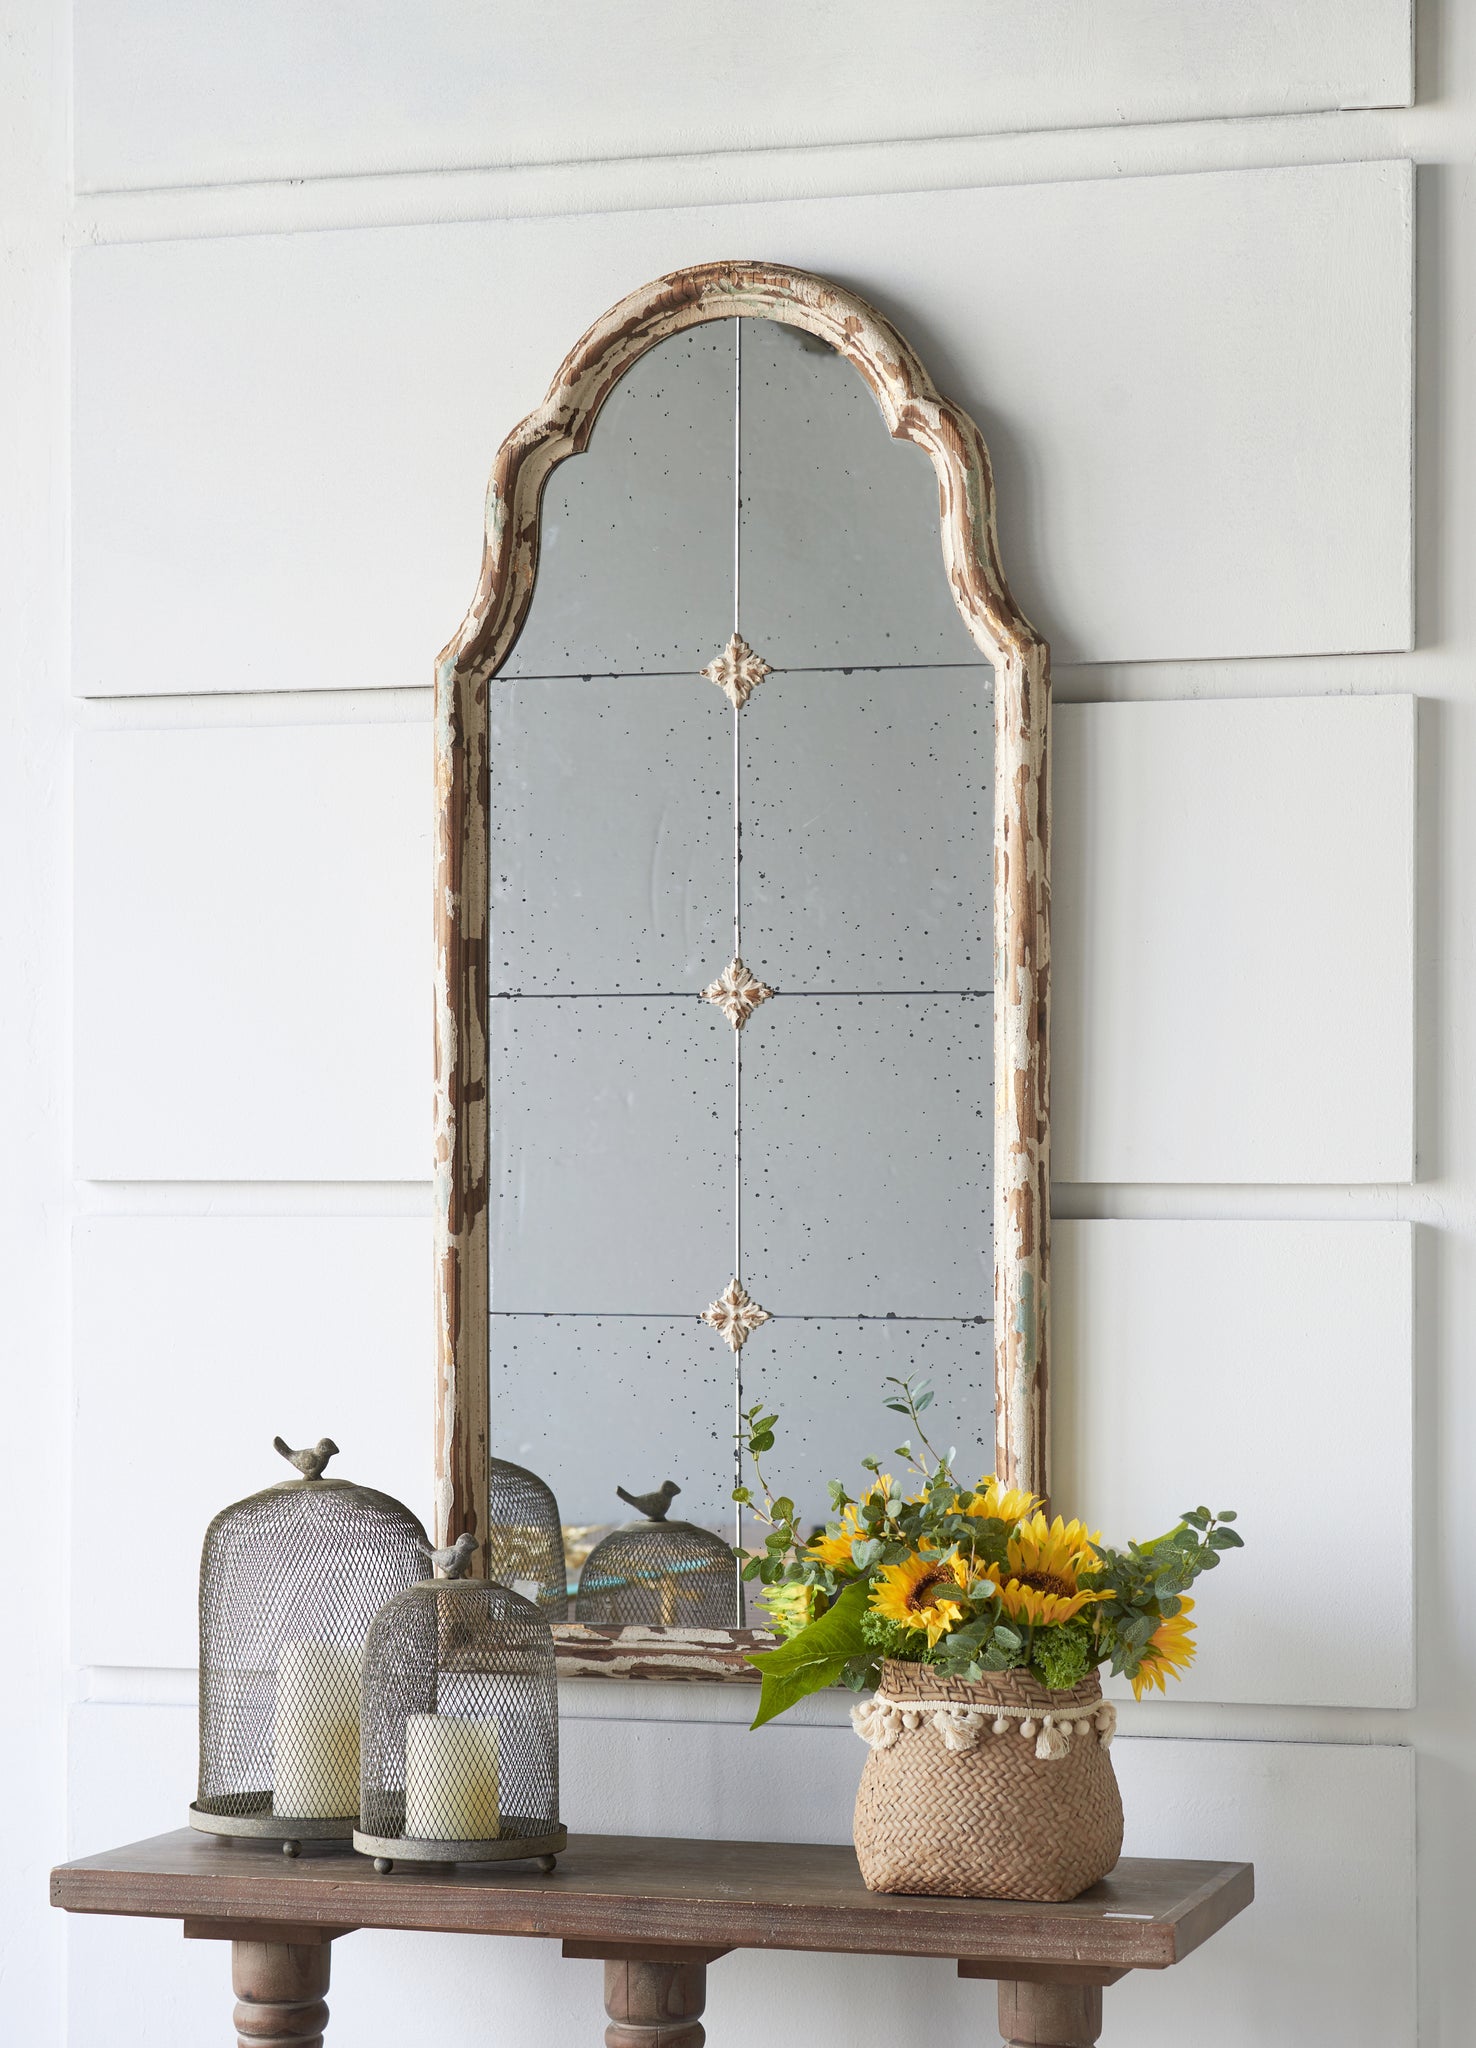 22" x 48" Large Cream & Gold Framed Wall Mirror,